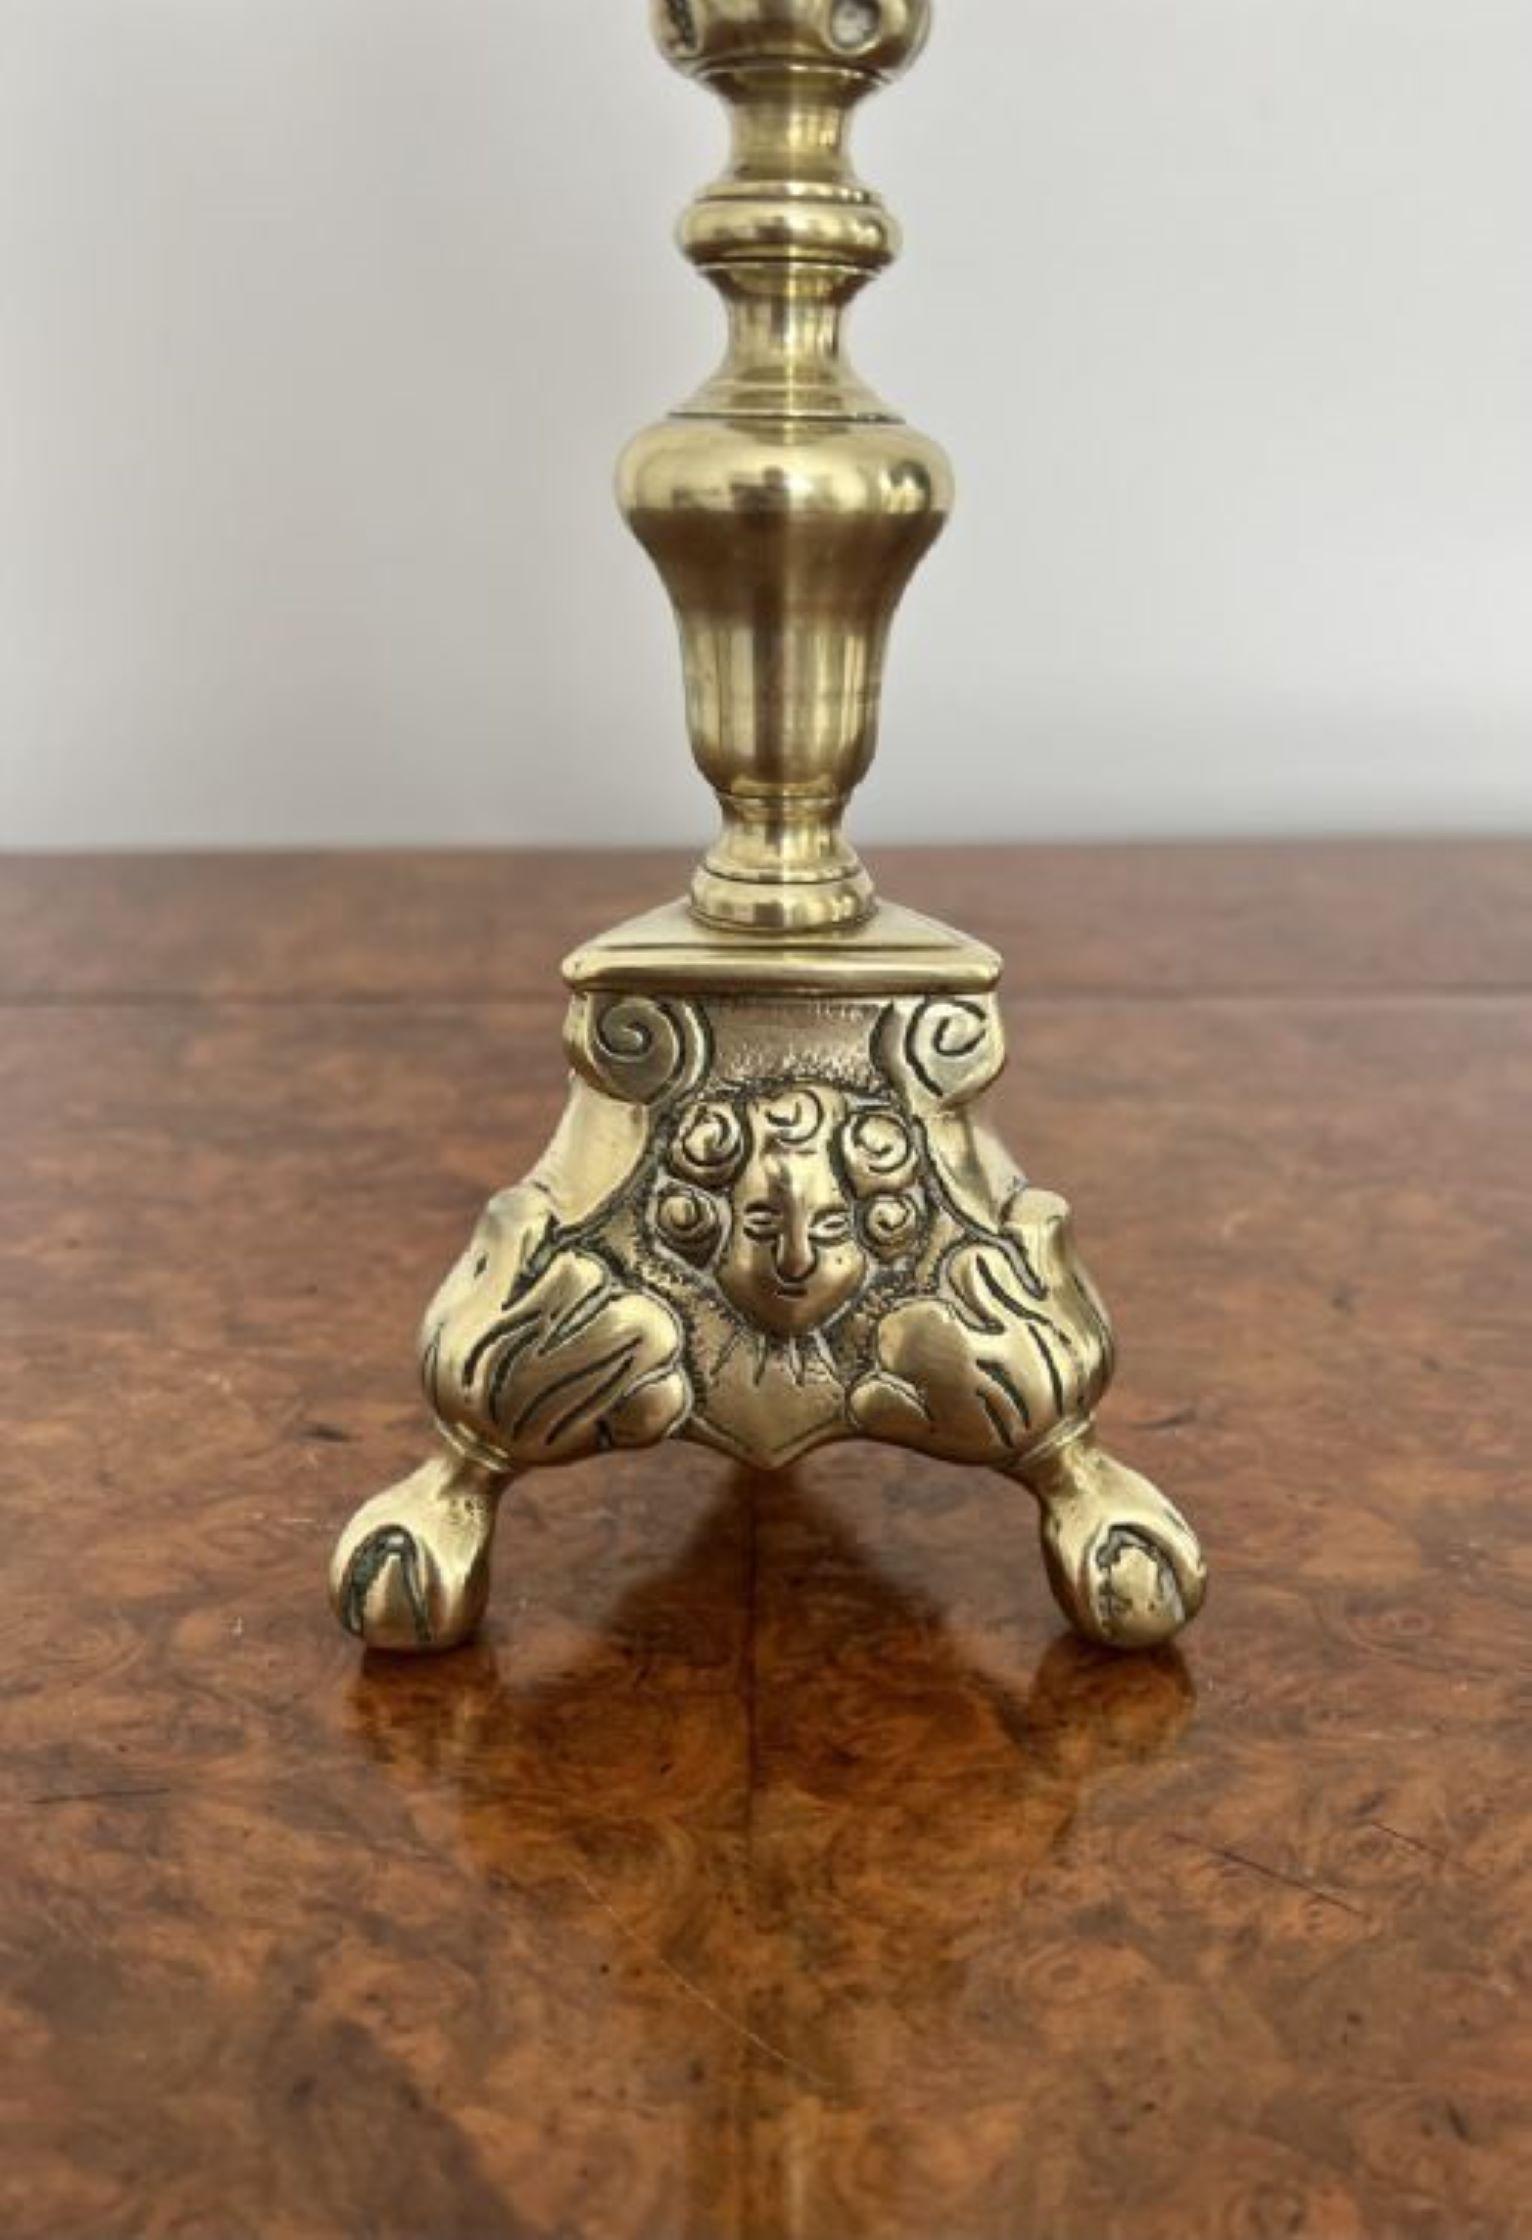 Quality Pair of Unusual Antique Victorian Ornate Brass Pricket Candlestick For Sale 4